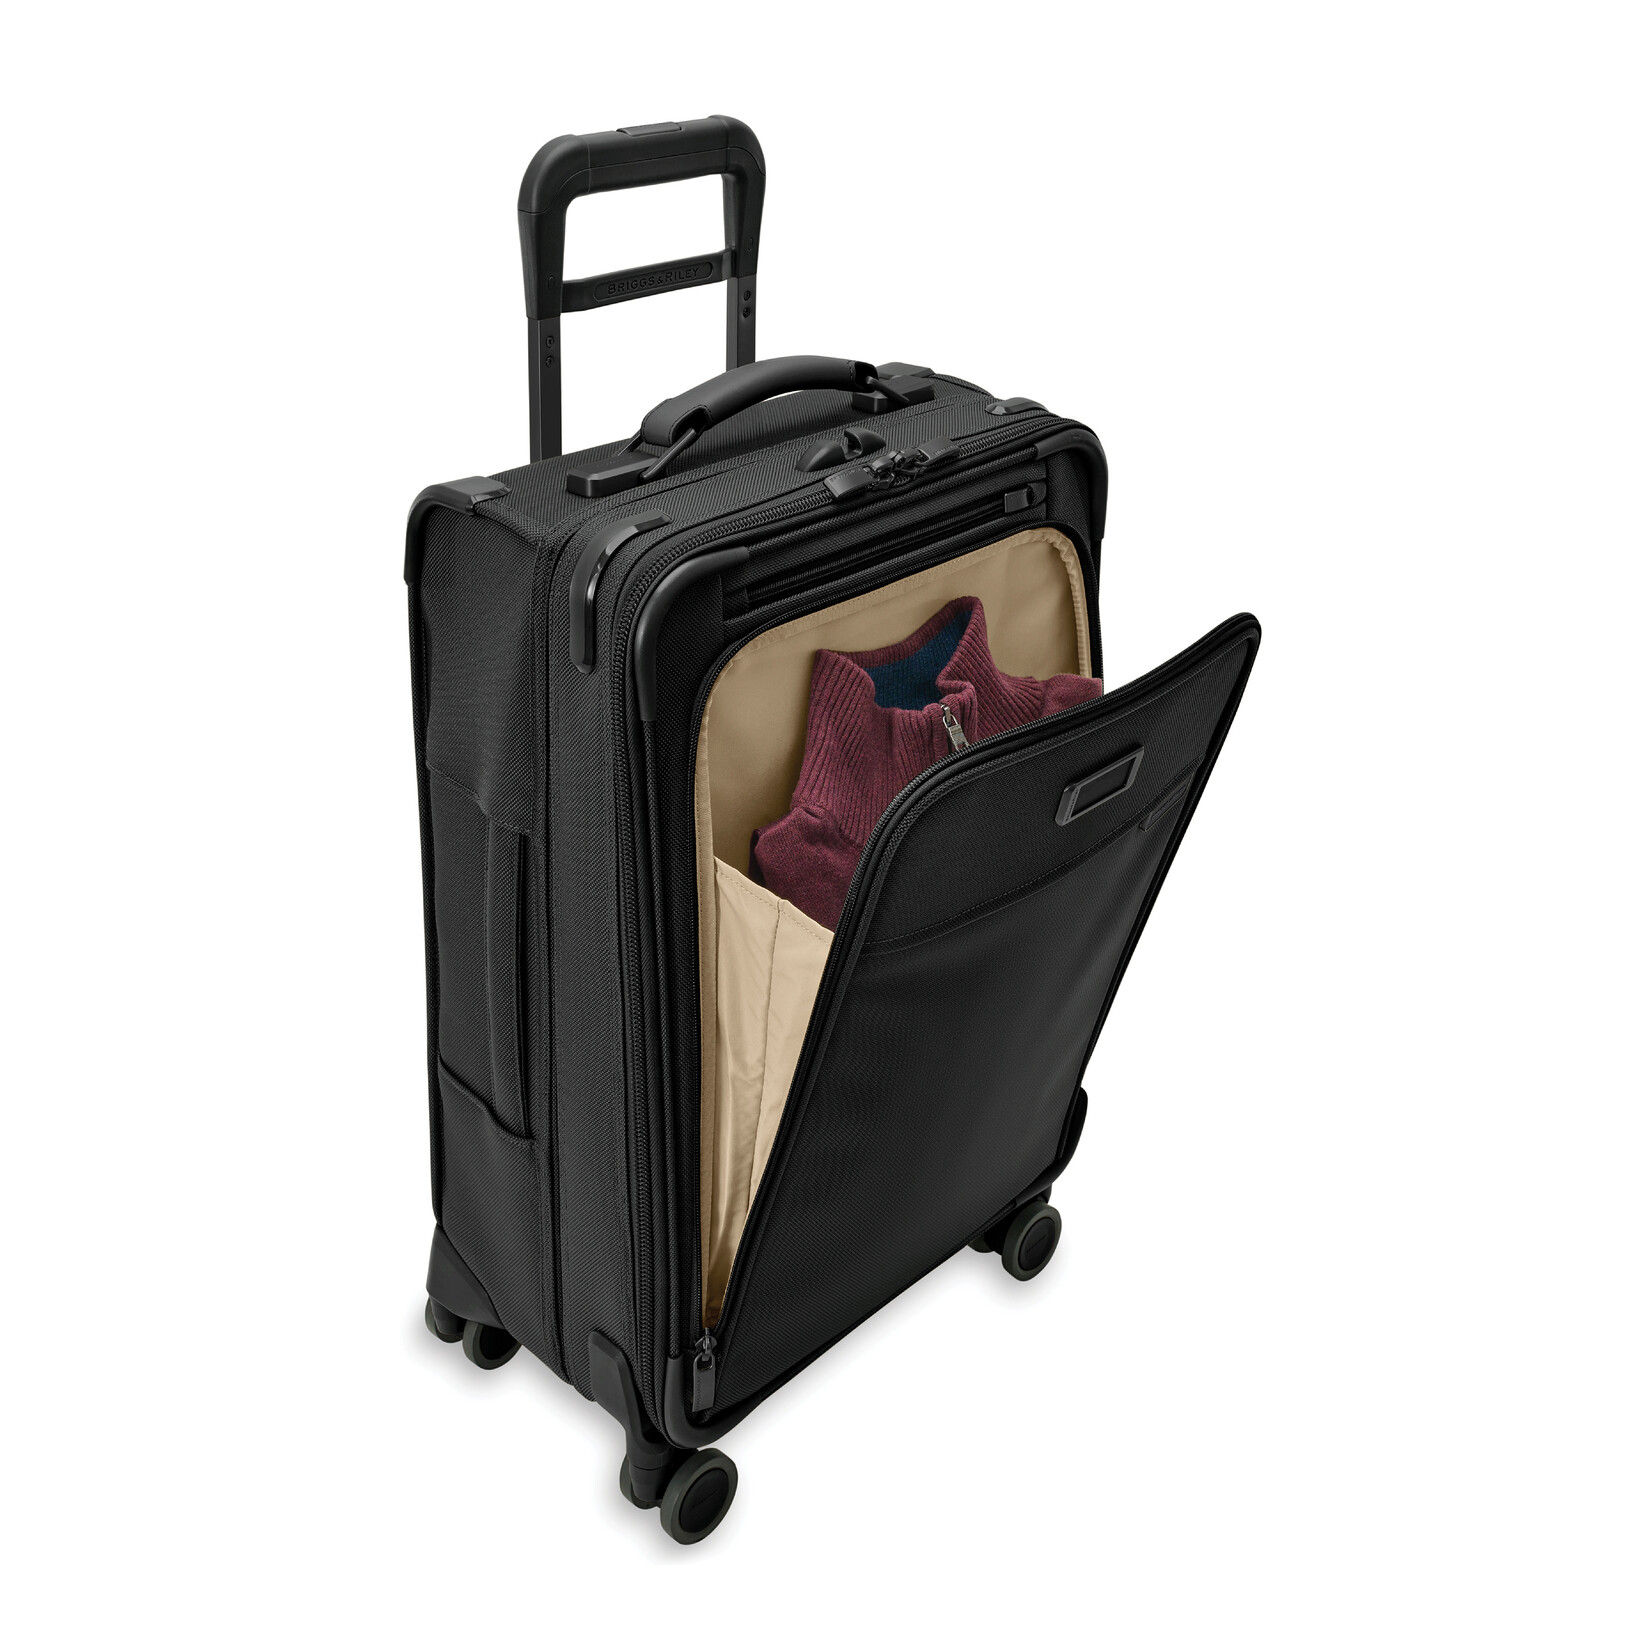 BRIGGS & RILEY BASELINE ESSENTIAL CARRY-ON SPINNER